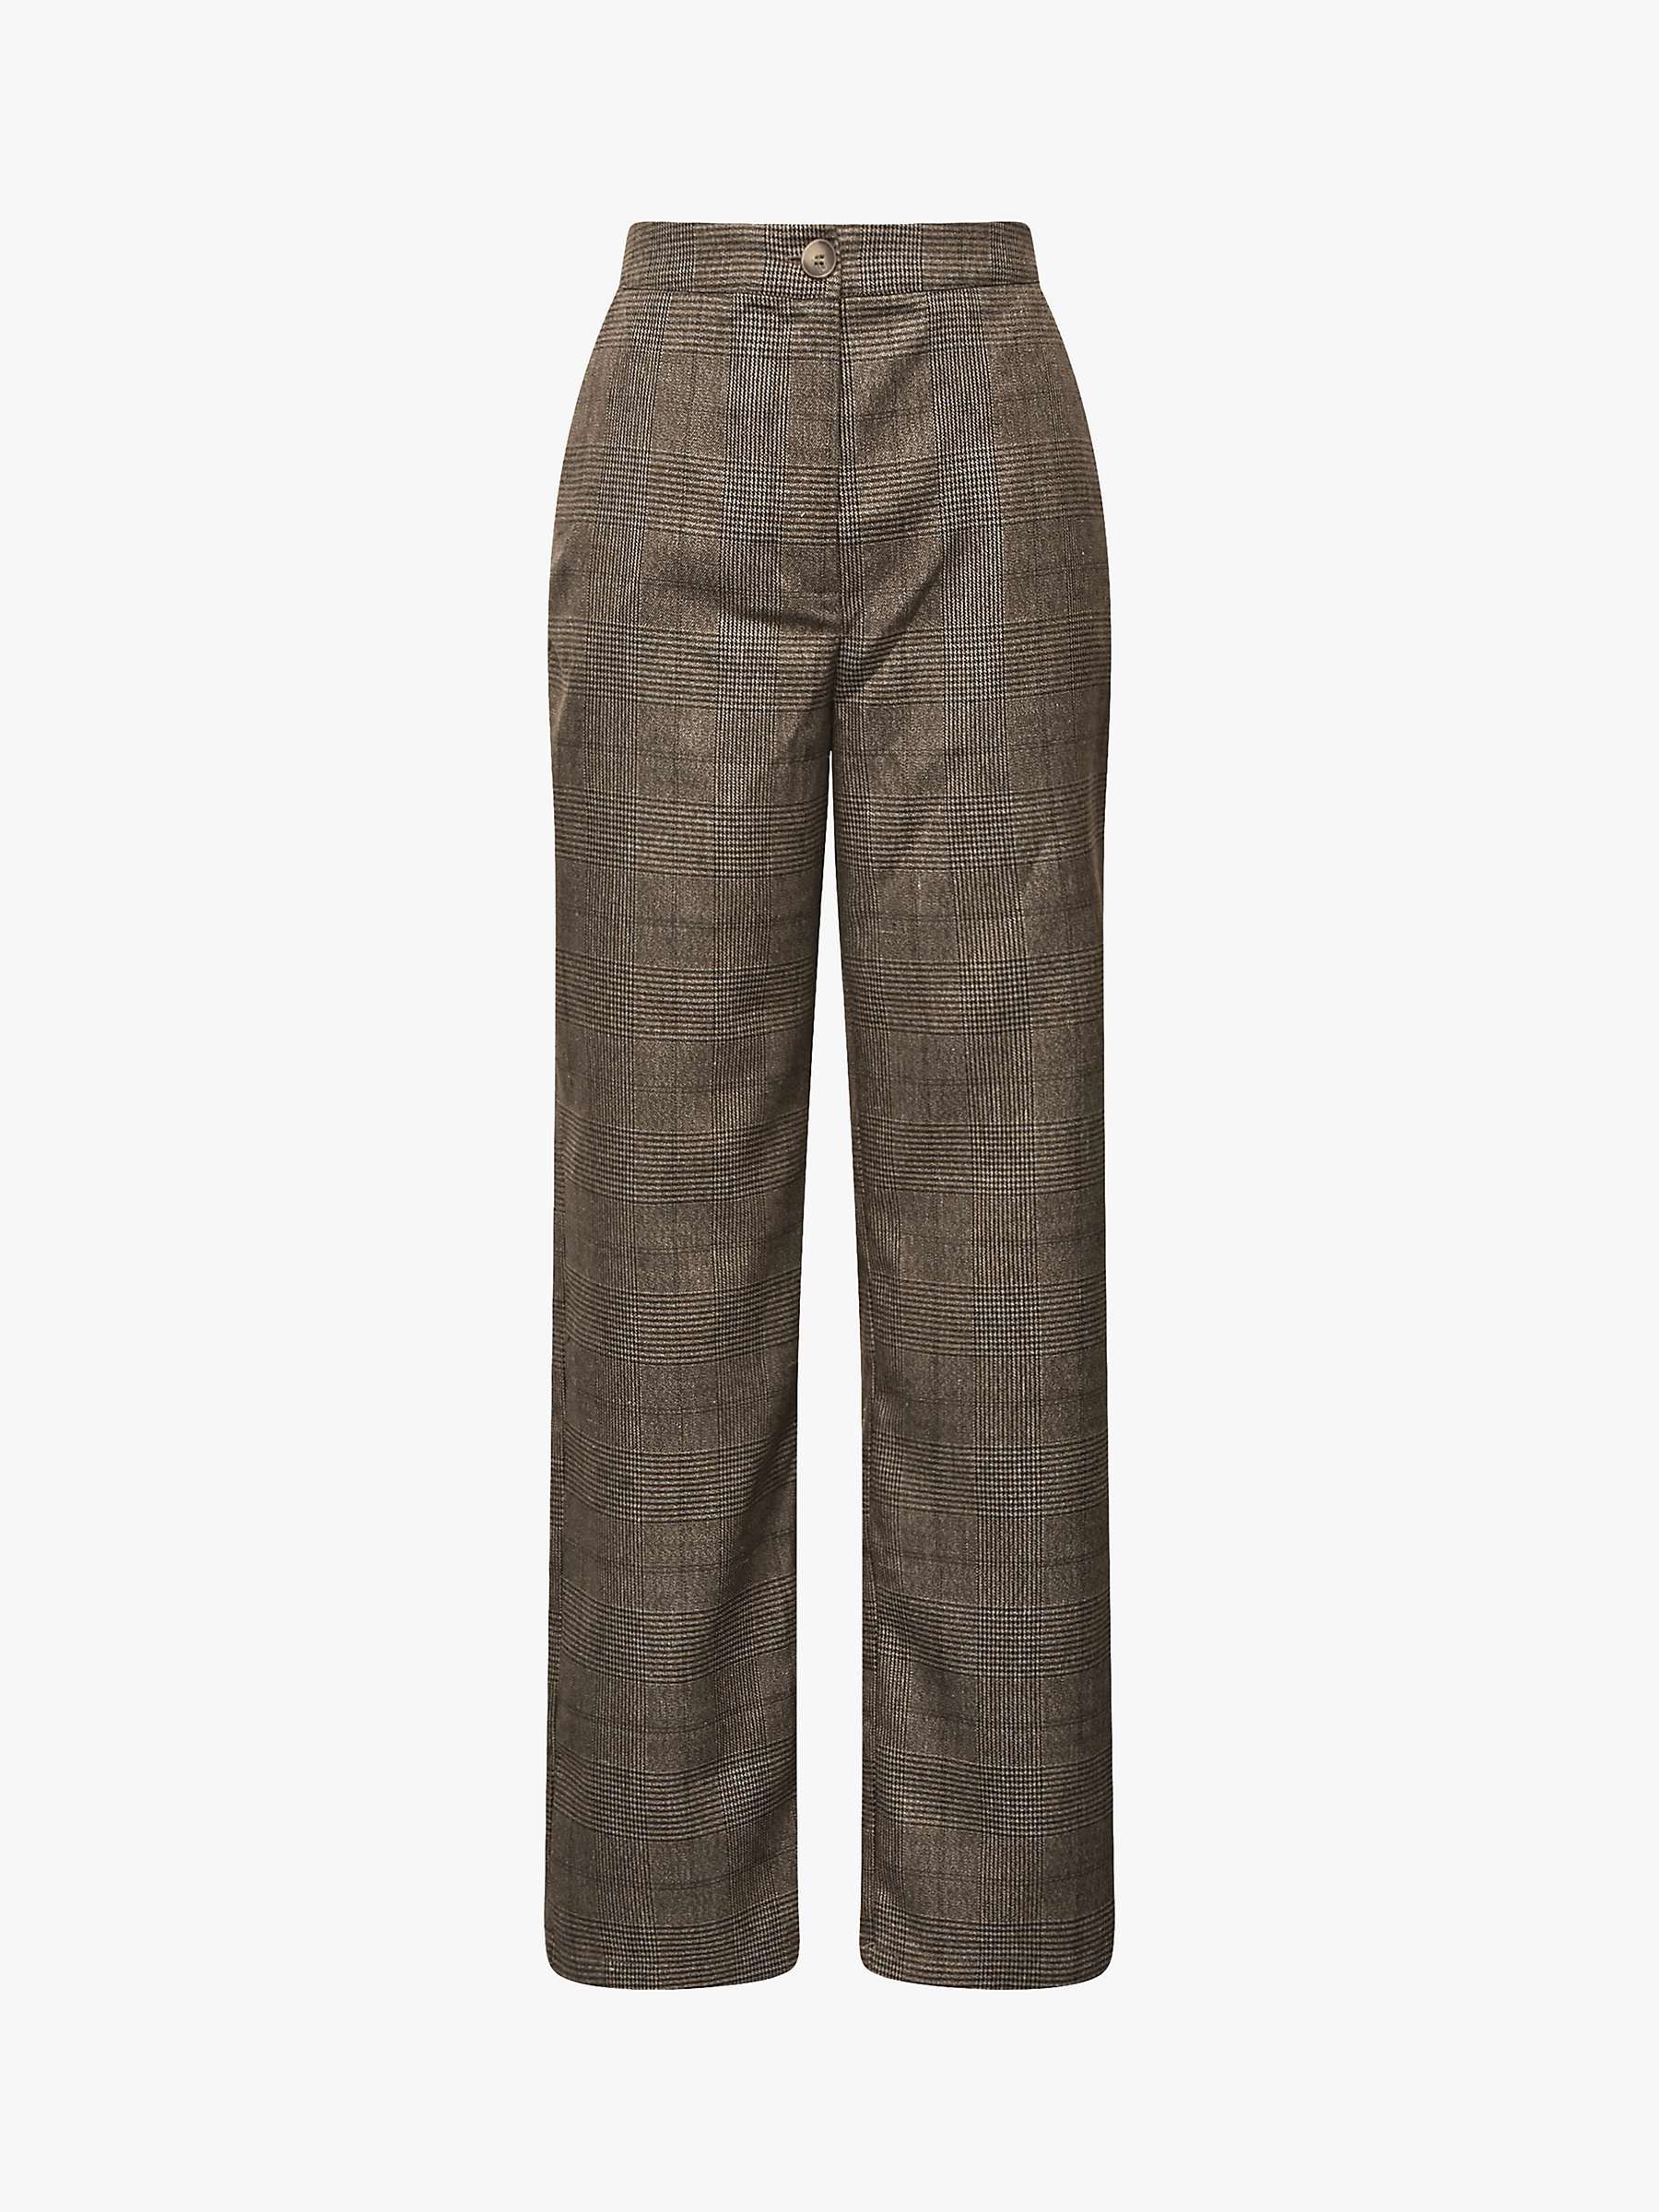 Buy A-VIEW Annali Check Wide Leg Trousers, Brown Online at johnlewis.com